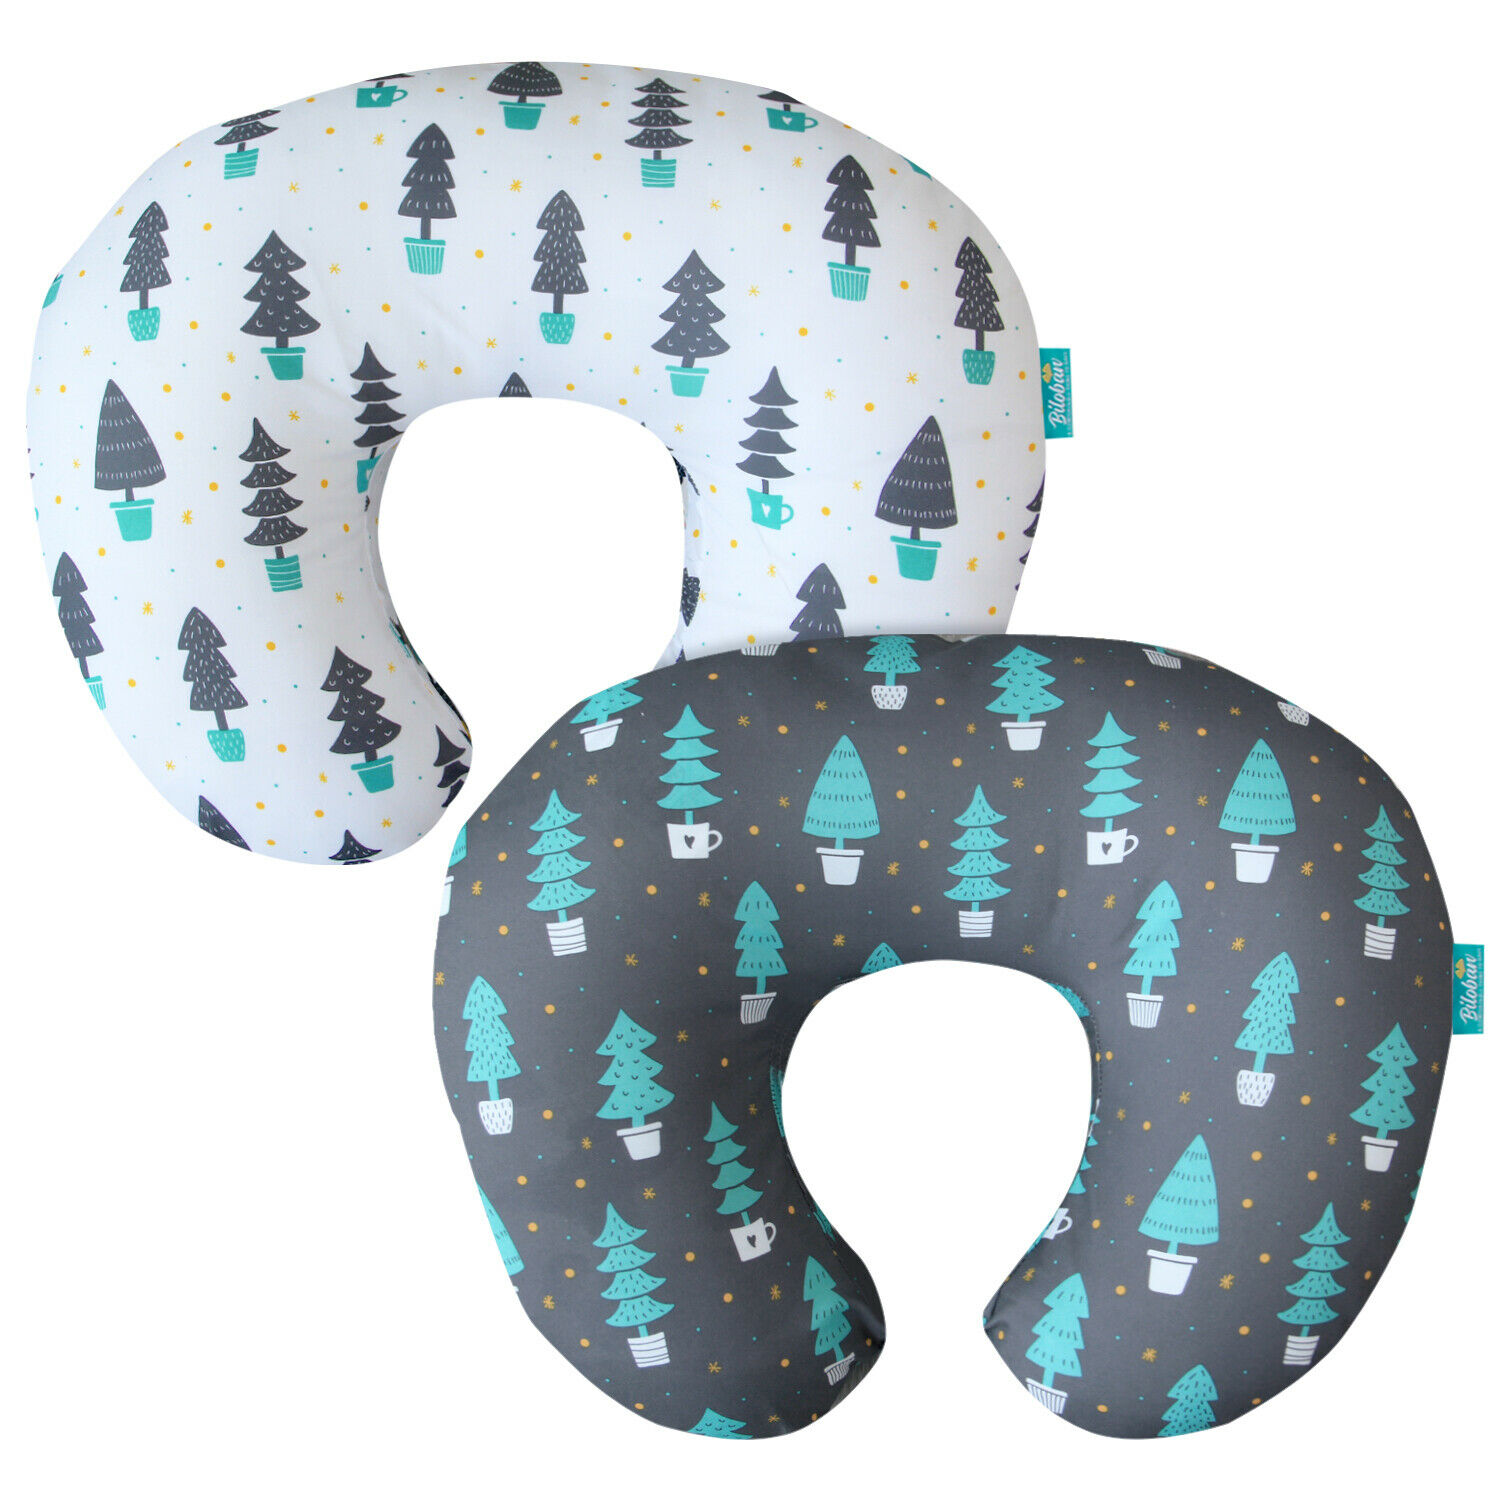 Nursing Pillow Cover Breastfeeding For Boppy Pillow Safely With Zipper 2 Pack